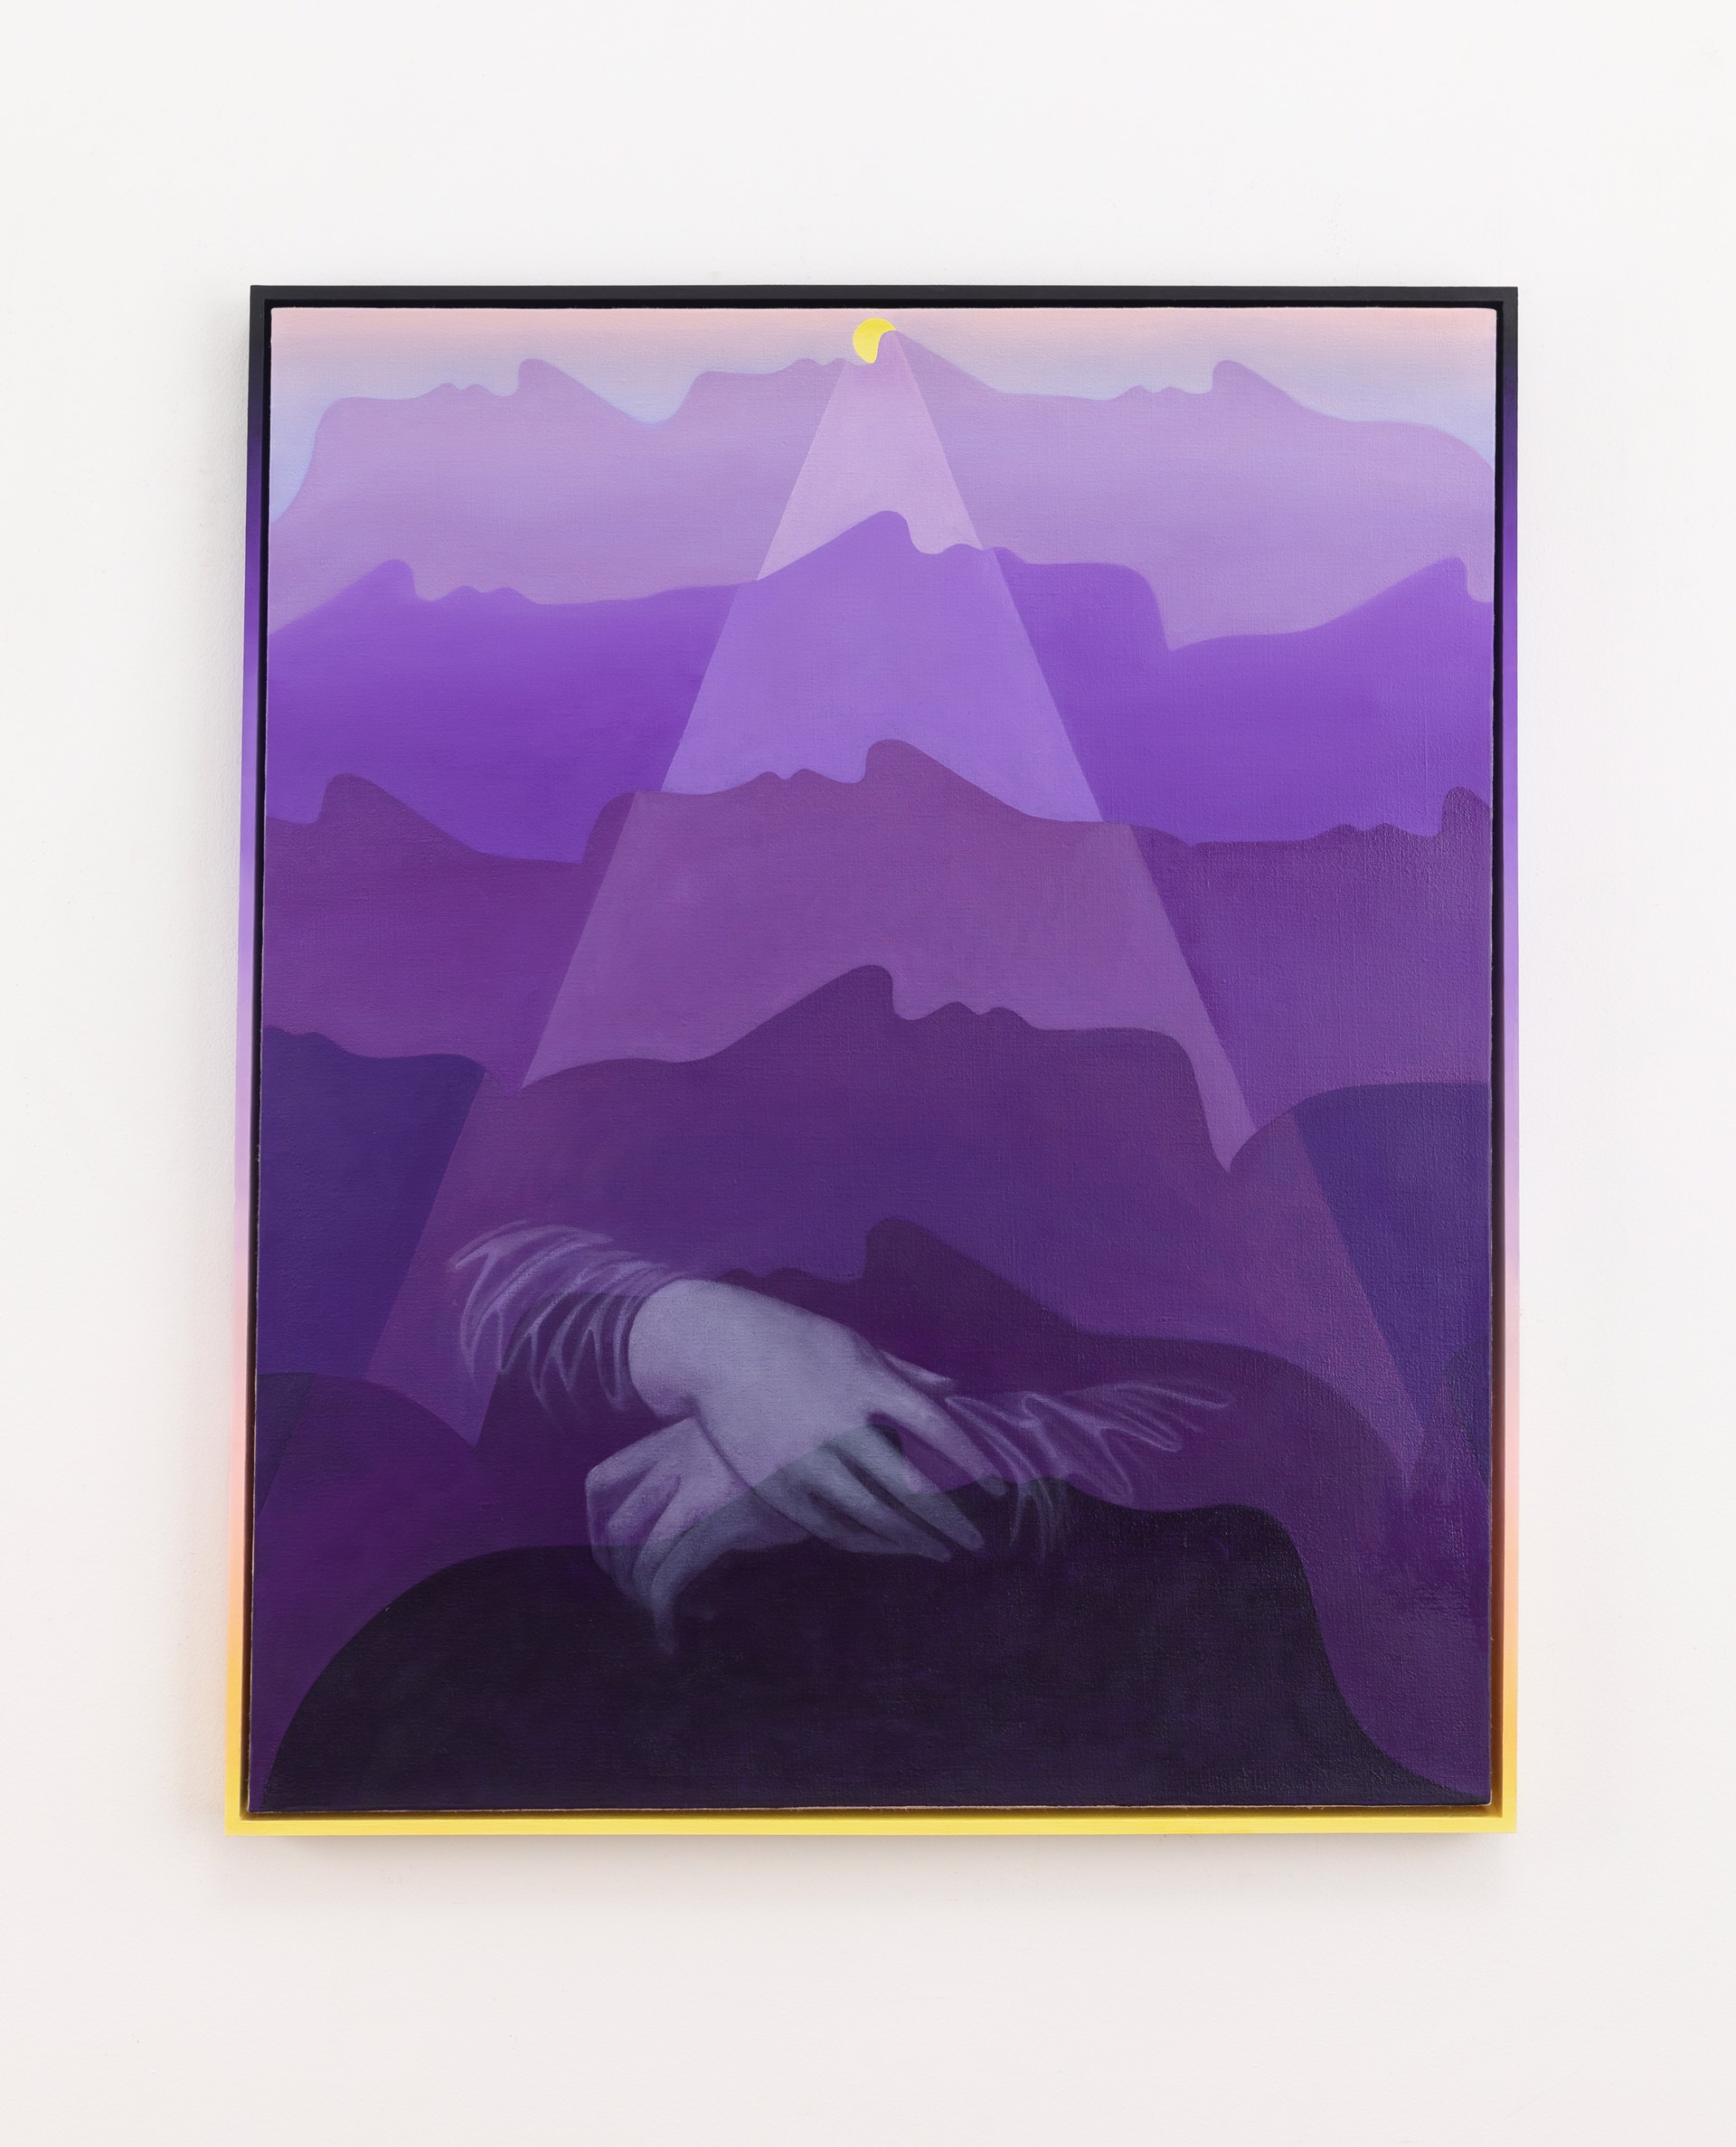 The Constantly Receding Past (Mona) by Emily Weiner